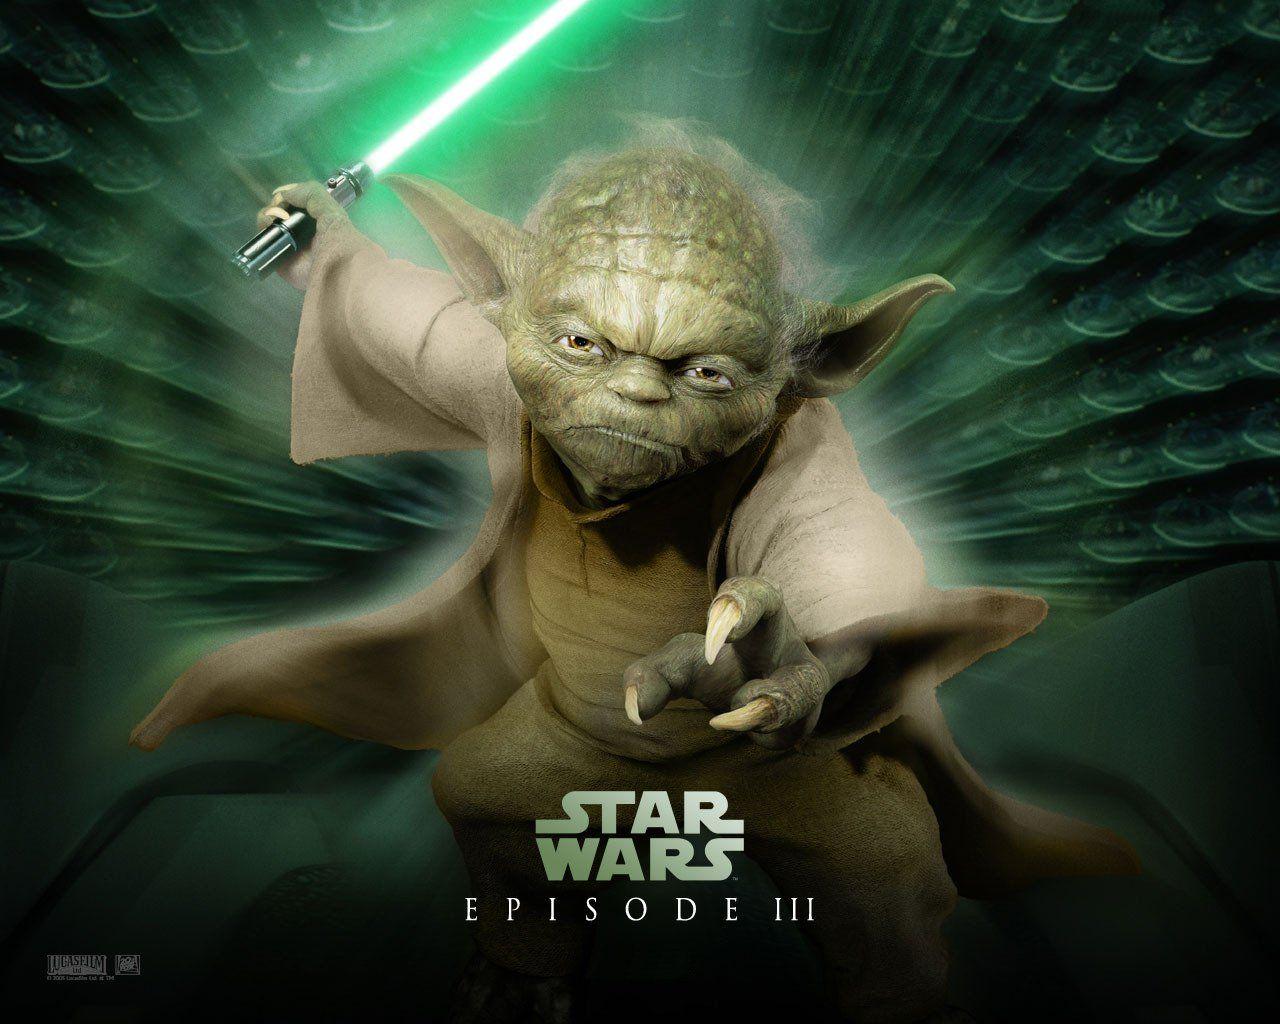 Yoda with a lightsaber Wallpaper and Background Imagex1024